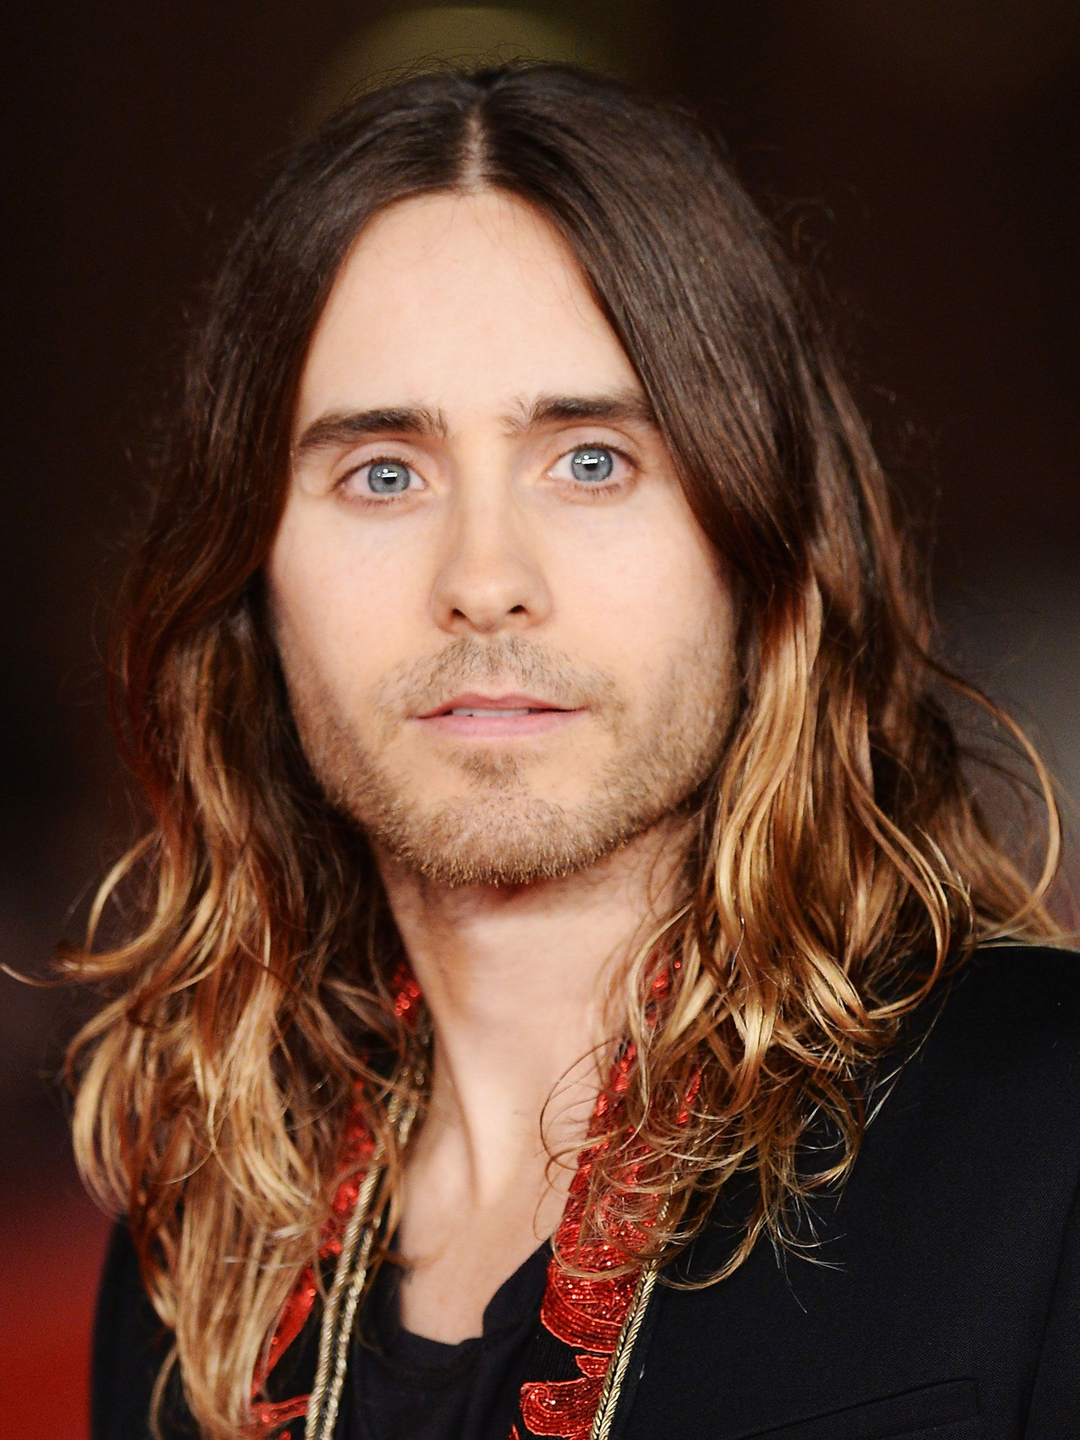 Jared Leto in real life